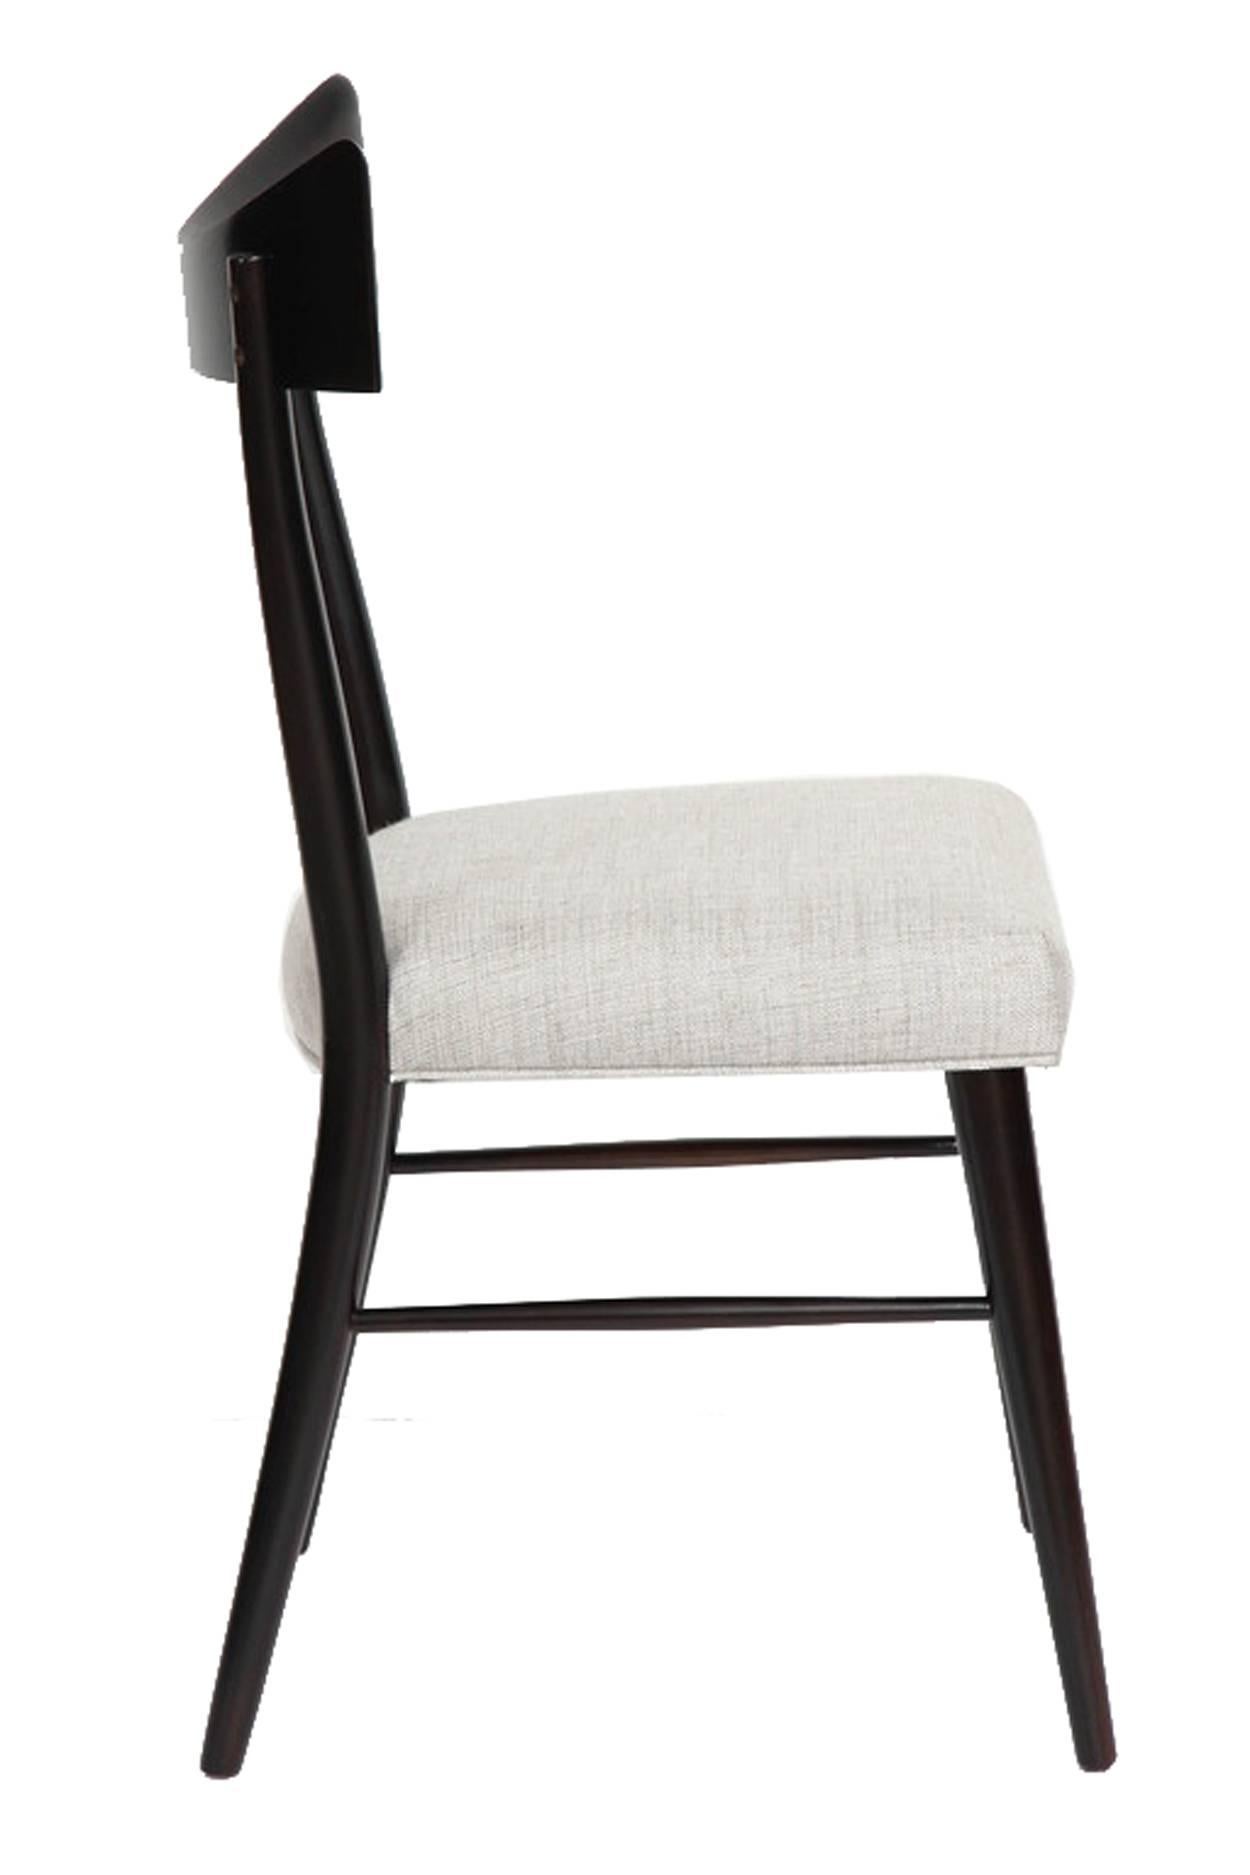 Linen Paul McCobb Planner Group 8 Dining Chairs